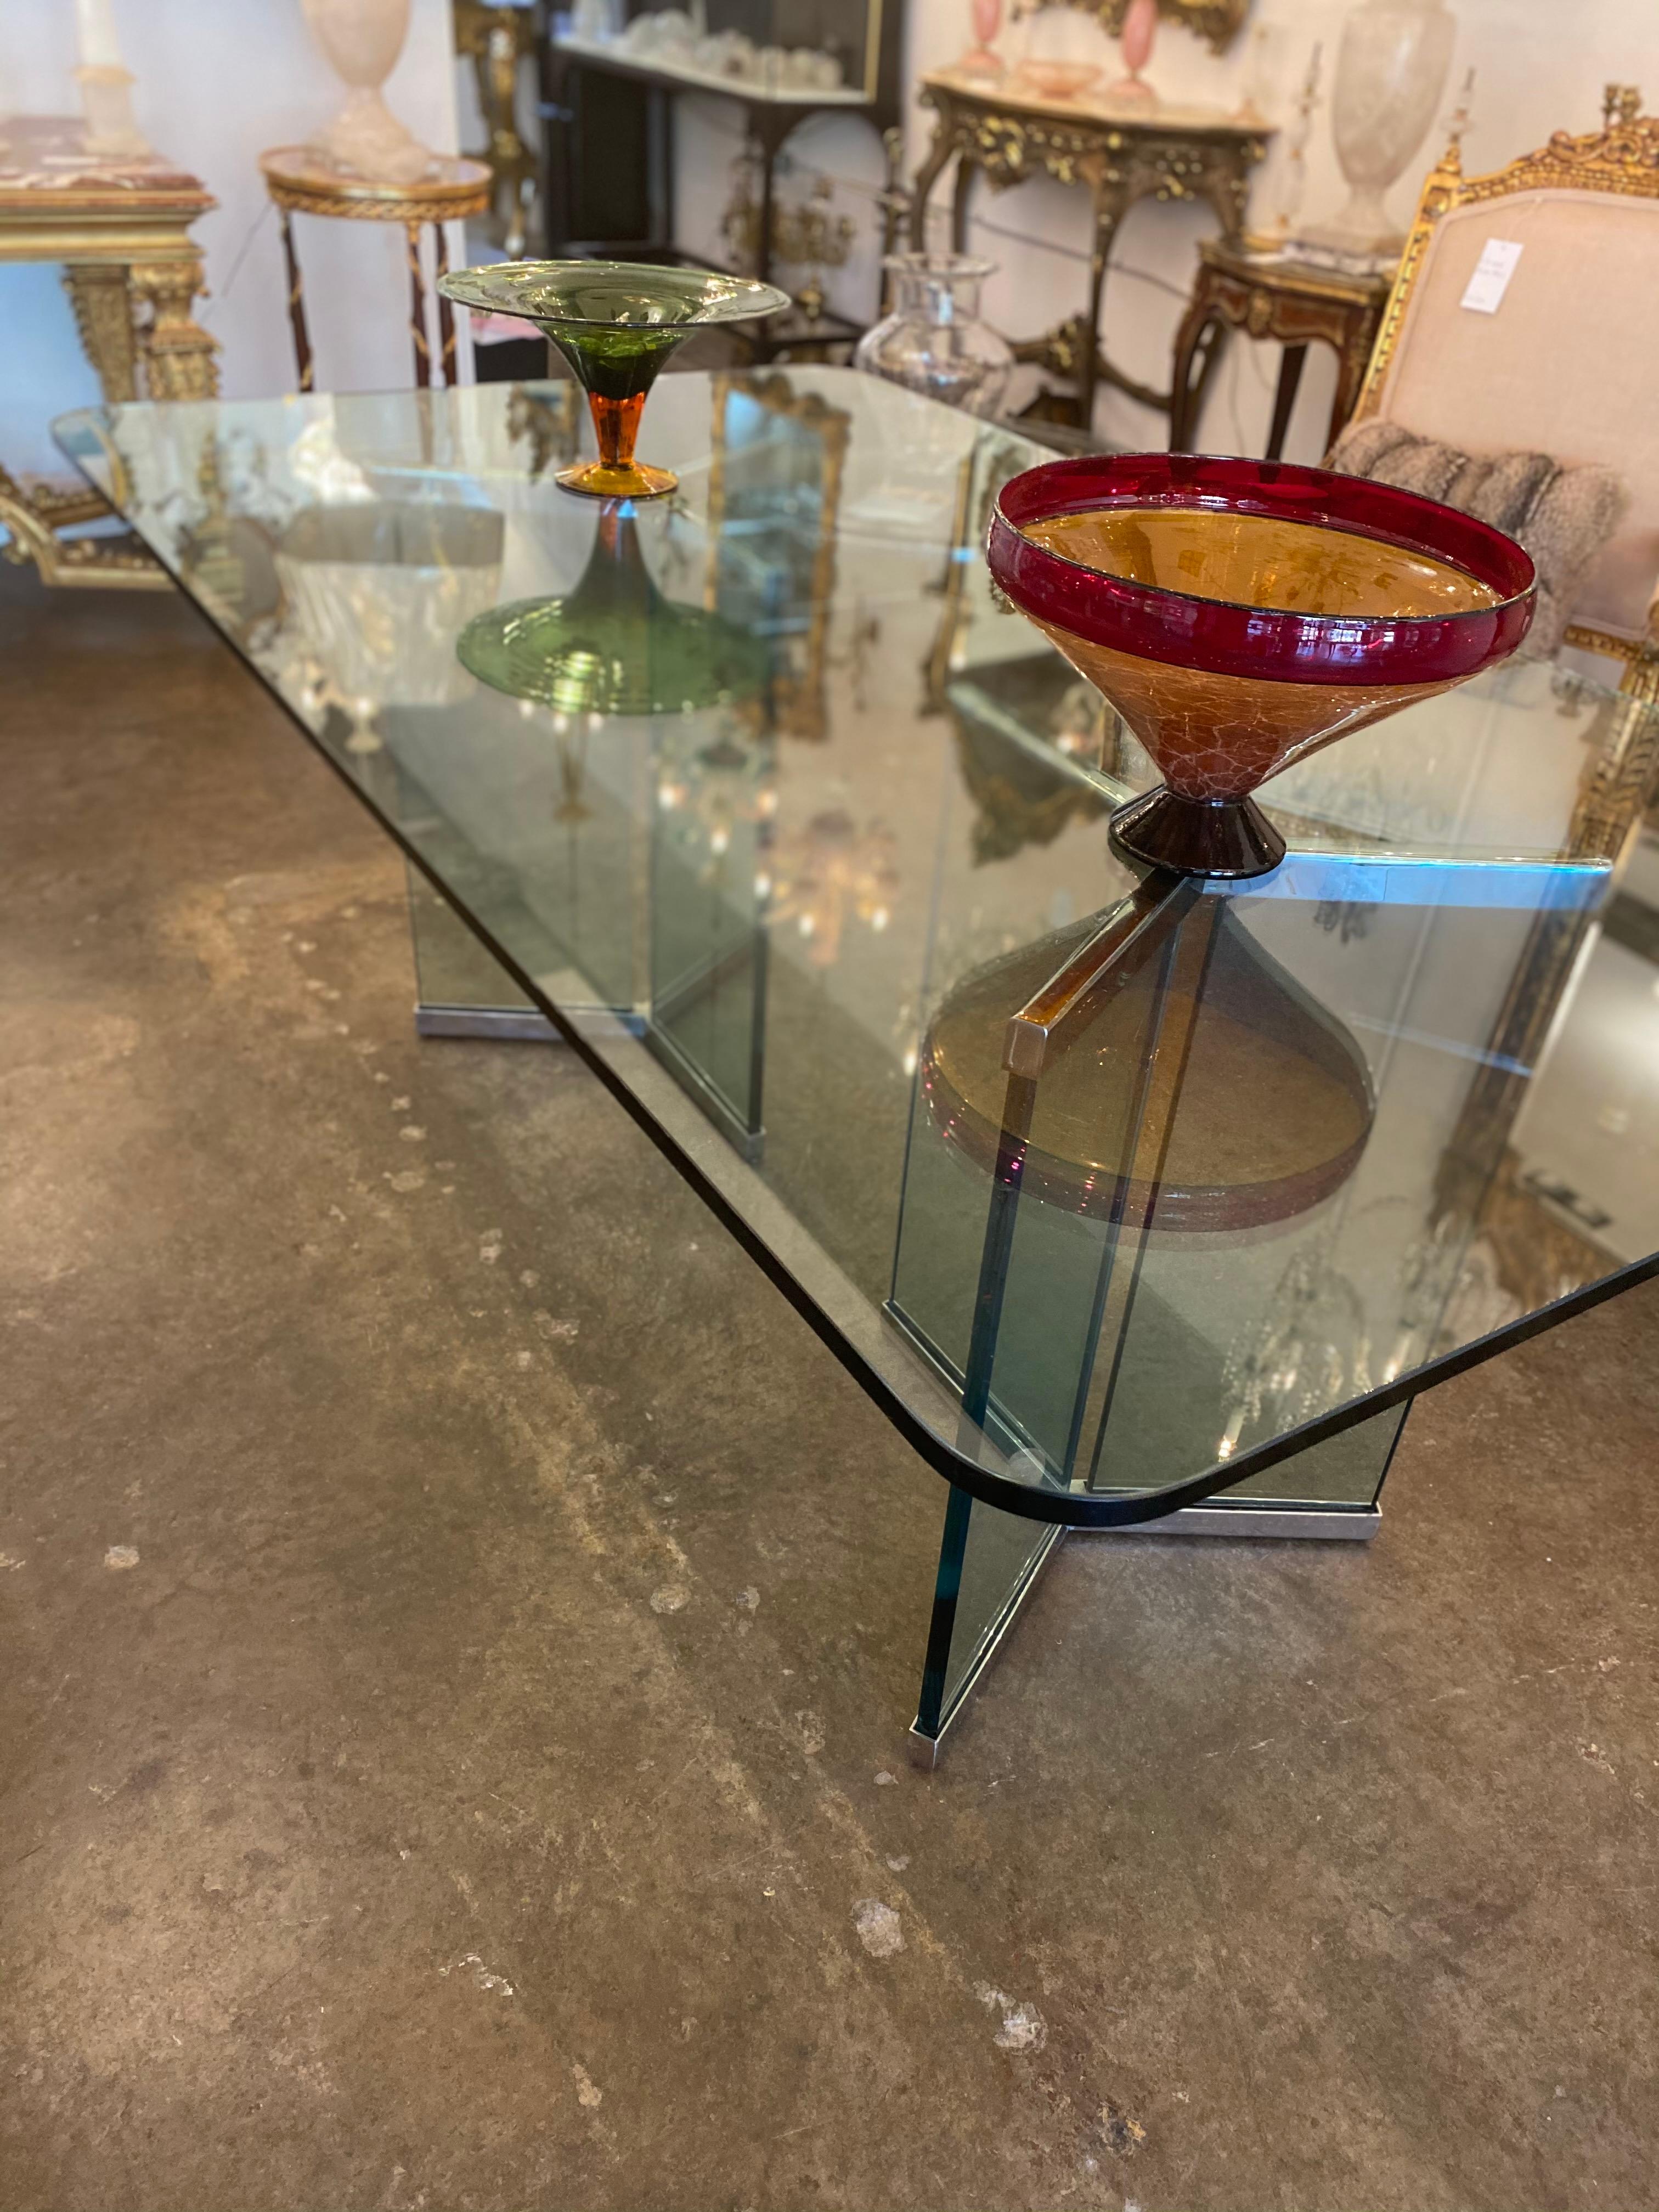 Large glass dining table with X-shape legs with a trim of silver plated on the bottom of the legs. Beautiful modern table.